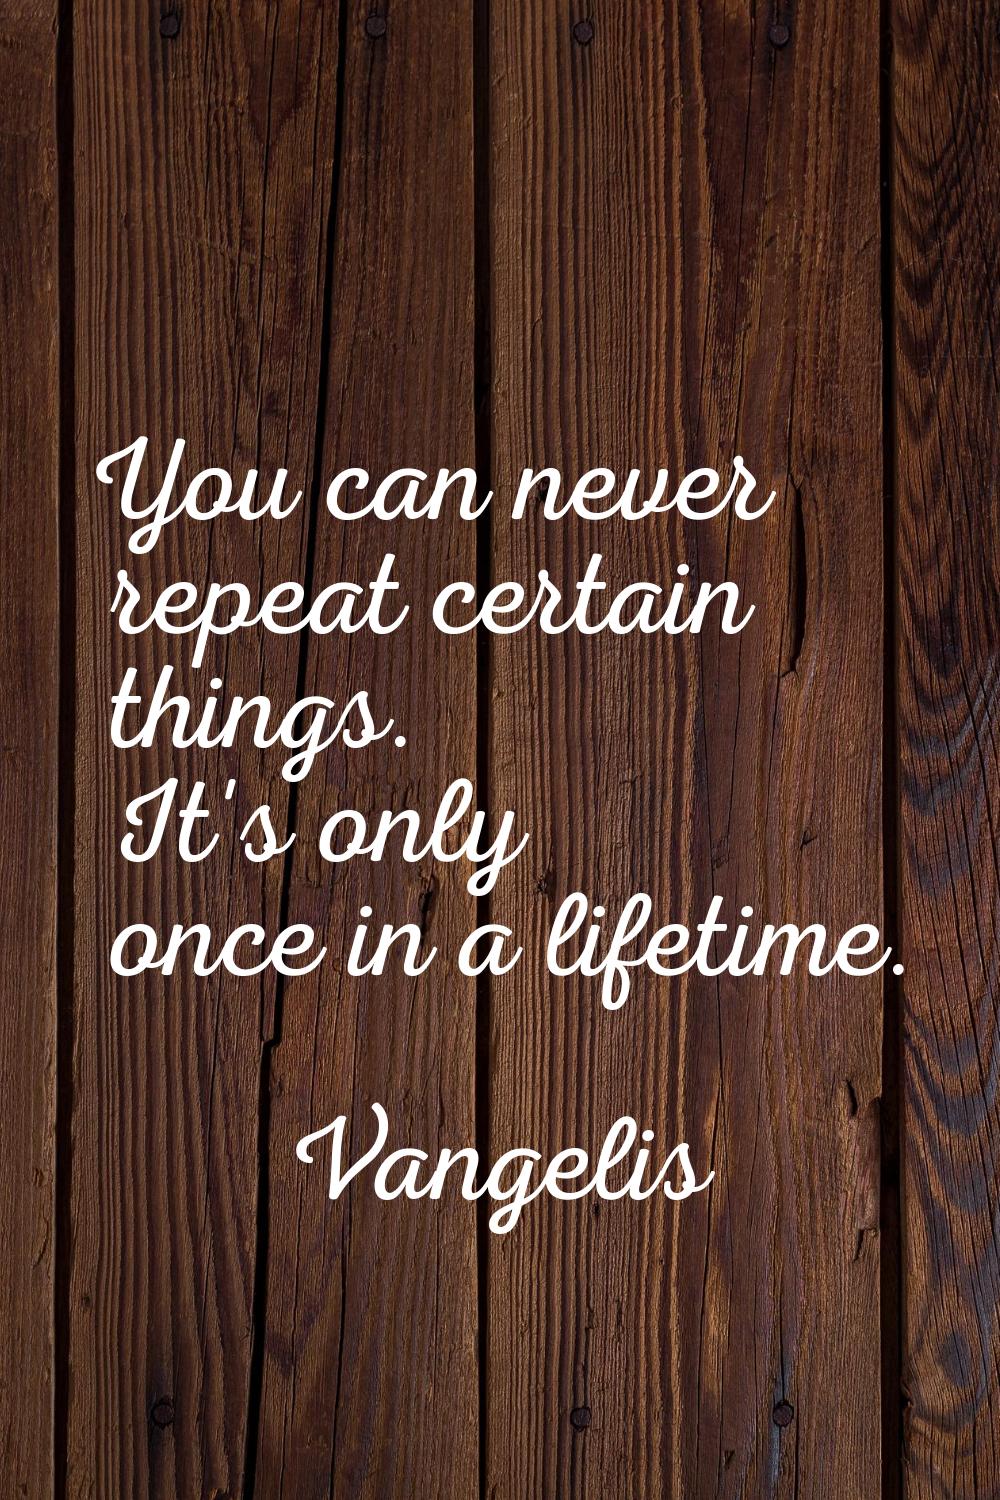 You can never repeat certain things. It's only once in a lifetime.